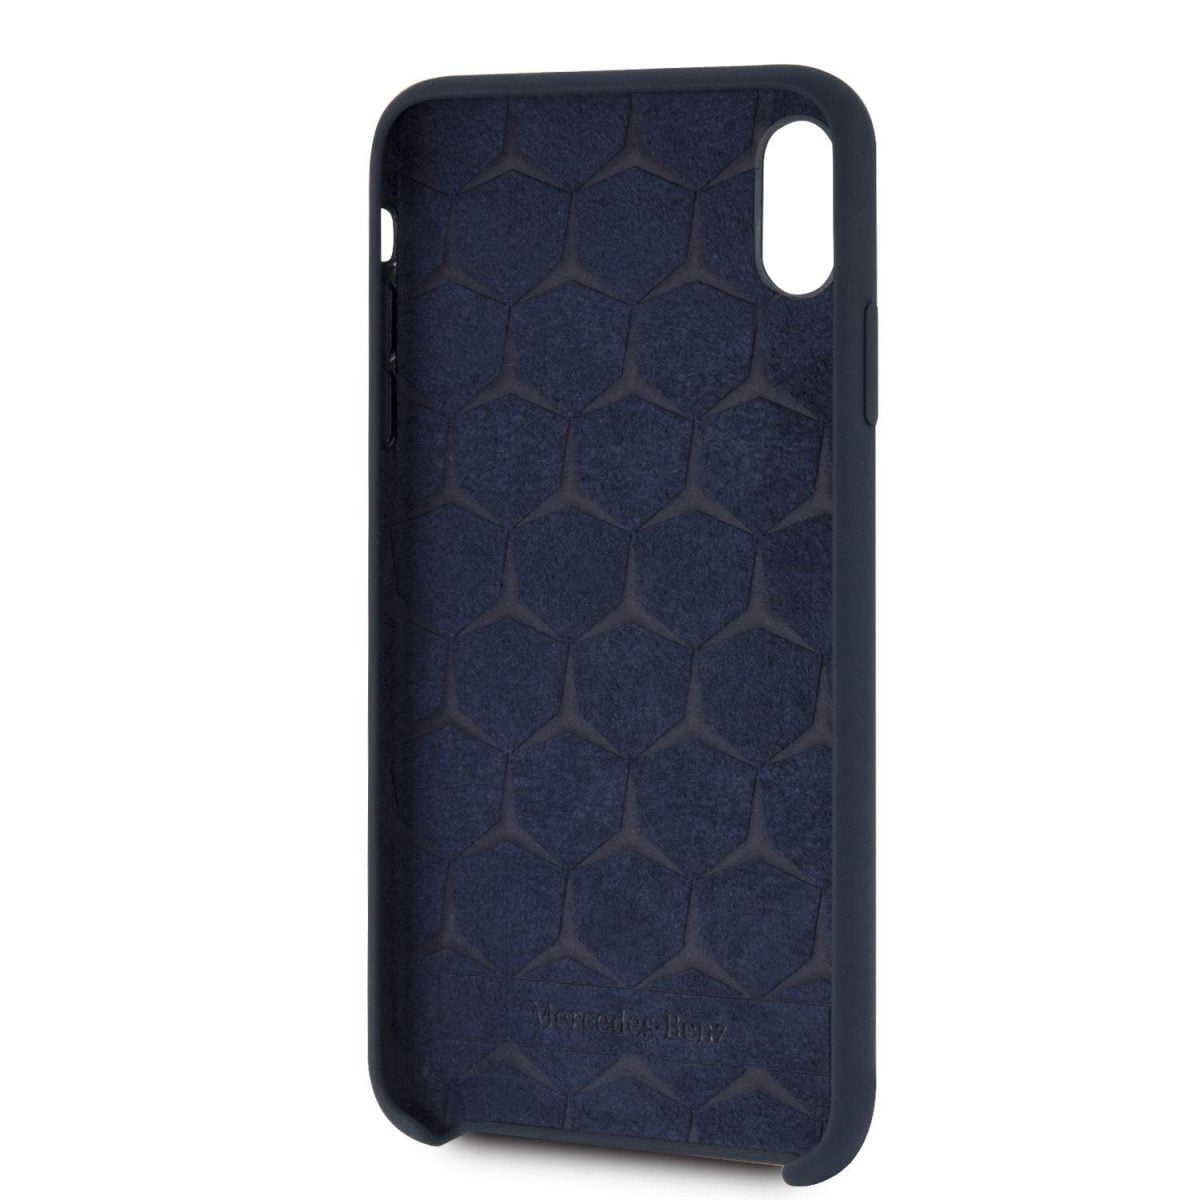 Mercedes Benz Iphone Xs Max Liquid Silicon Silcon Case With Microfiber Lining Navy 04 This Hard Silicone Soft Case With A Sculpted Metallic Mercedes Benz Logo For A 3D Effect Gives You A Classic And Elegant Appeal To Your Handheld Device It Has Easy Accessibility For All Ports And Buttons. Case Compatible With Wireless Chargers. Soft Microfiber Interior, Easy To Hold &Amp; Easy Snap-On Design Makes It Fast And Easy To Install Or Take Off In Seconds This Case Provides Both The Ultimate Luxury Experience And Protection From Scratches And Abrasions By Slightly Raised Edges Iphone Case Iphone Xs Liquid Silicon Case With Microfiber Lining (Navy Blue) Mercedes-Benz